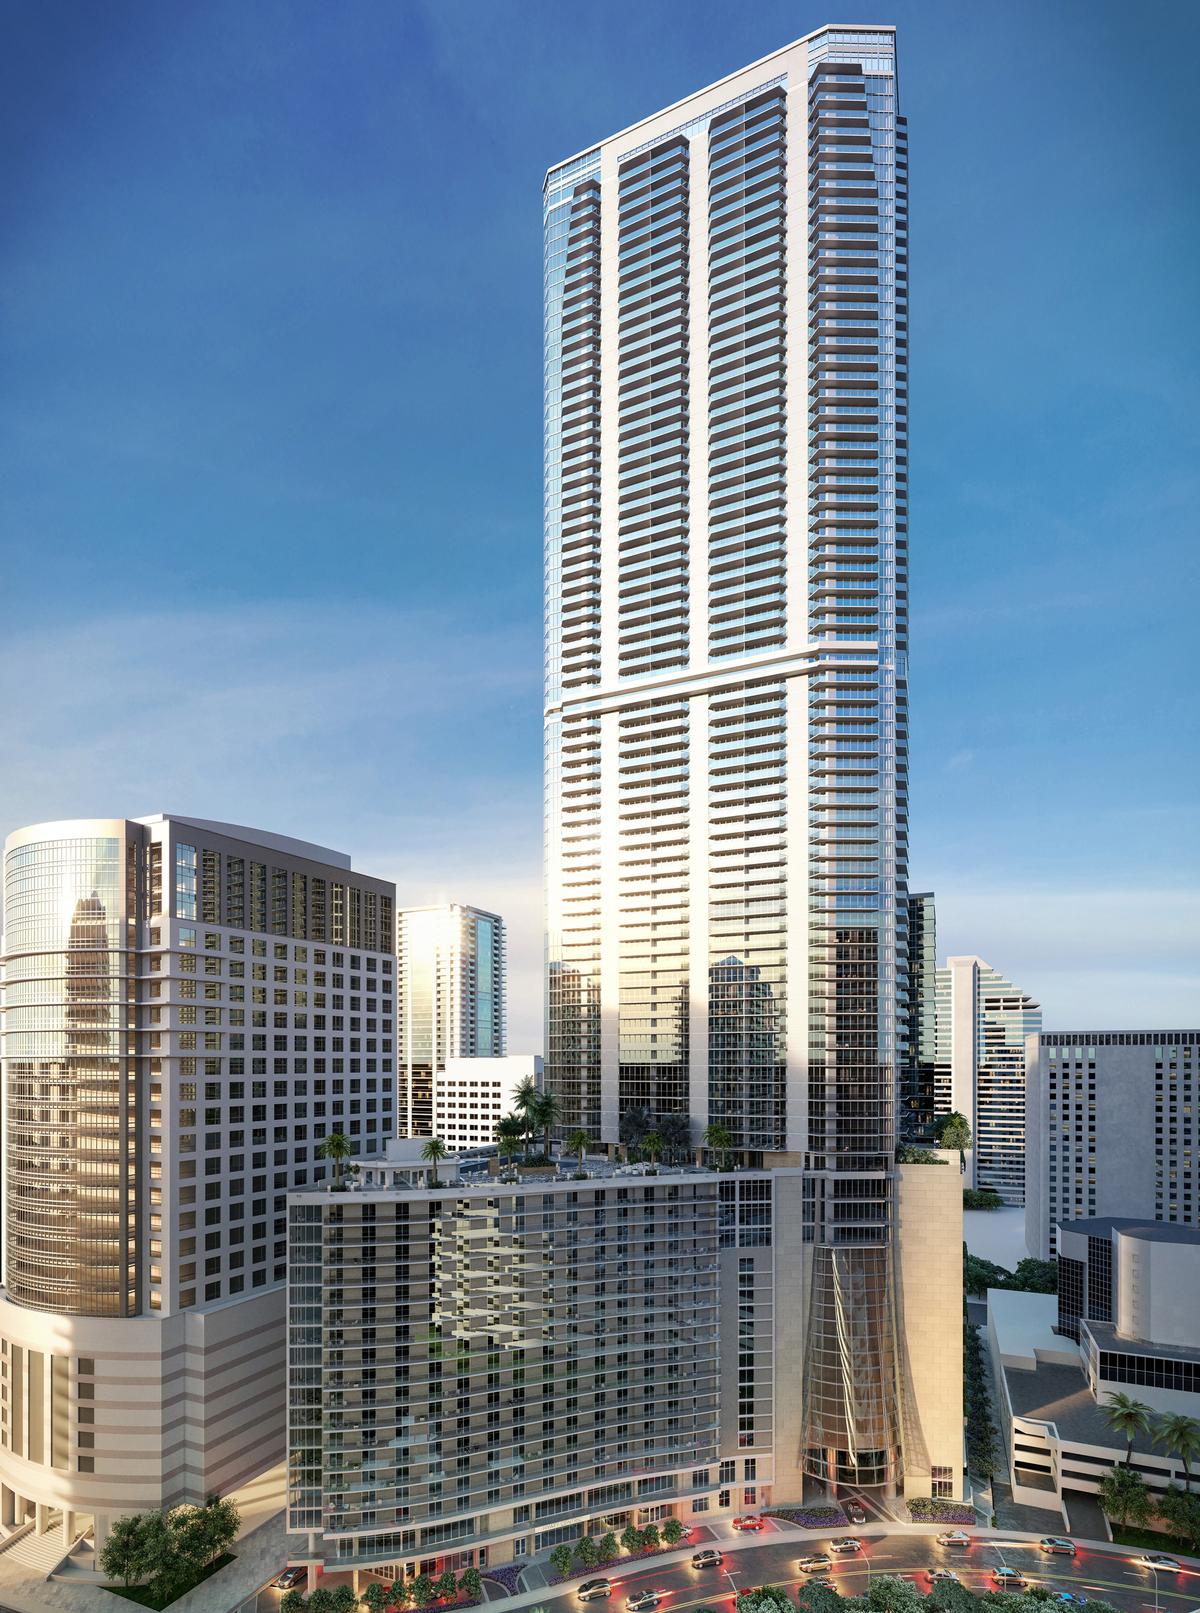 The 83-story, mixed-use Panorama Tower will include a Hyatt hotel and 821 residential units / 